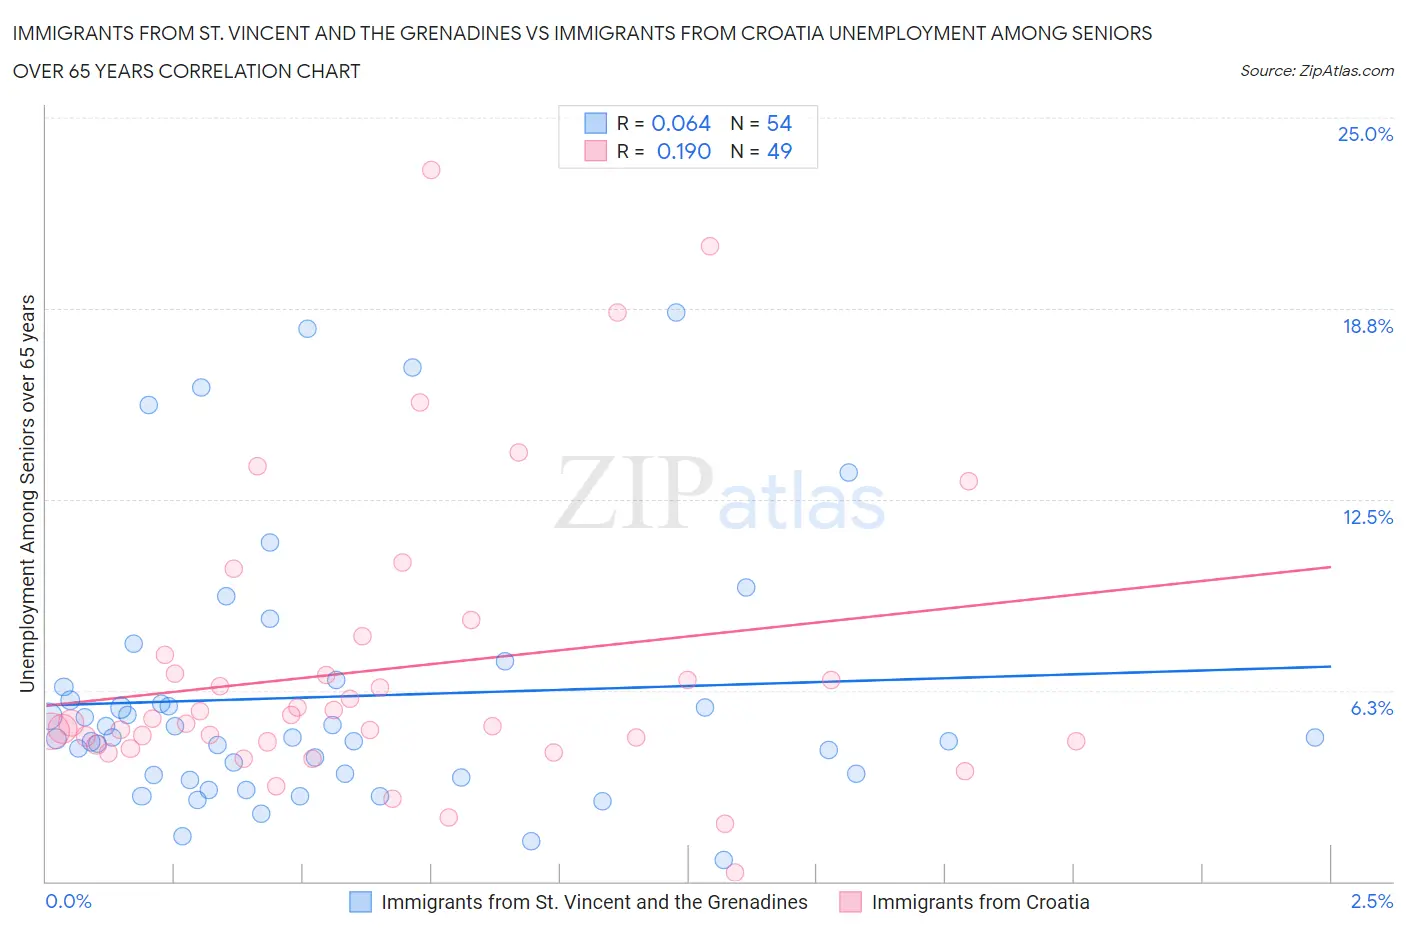 Immigrants from St. Vincent and the Grenadines vs Immigrants from Croatia Unemployment Among Seniors over 65 years